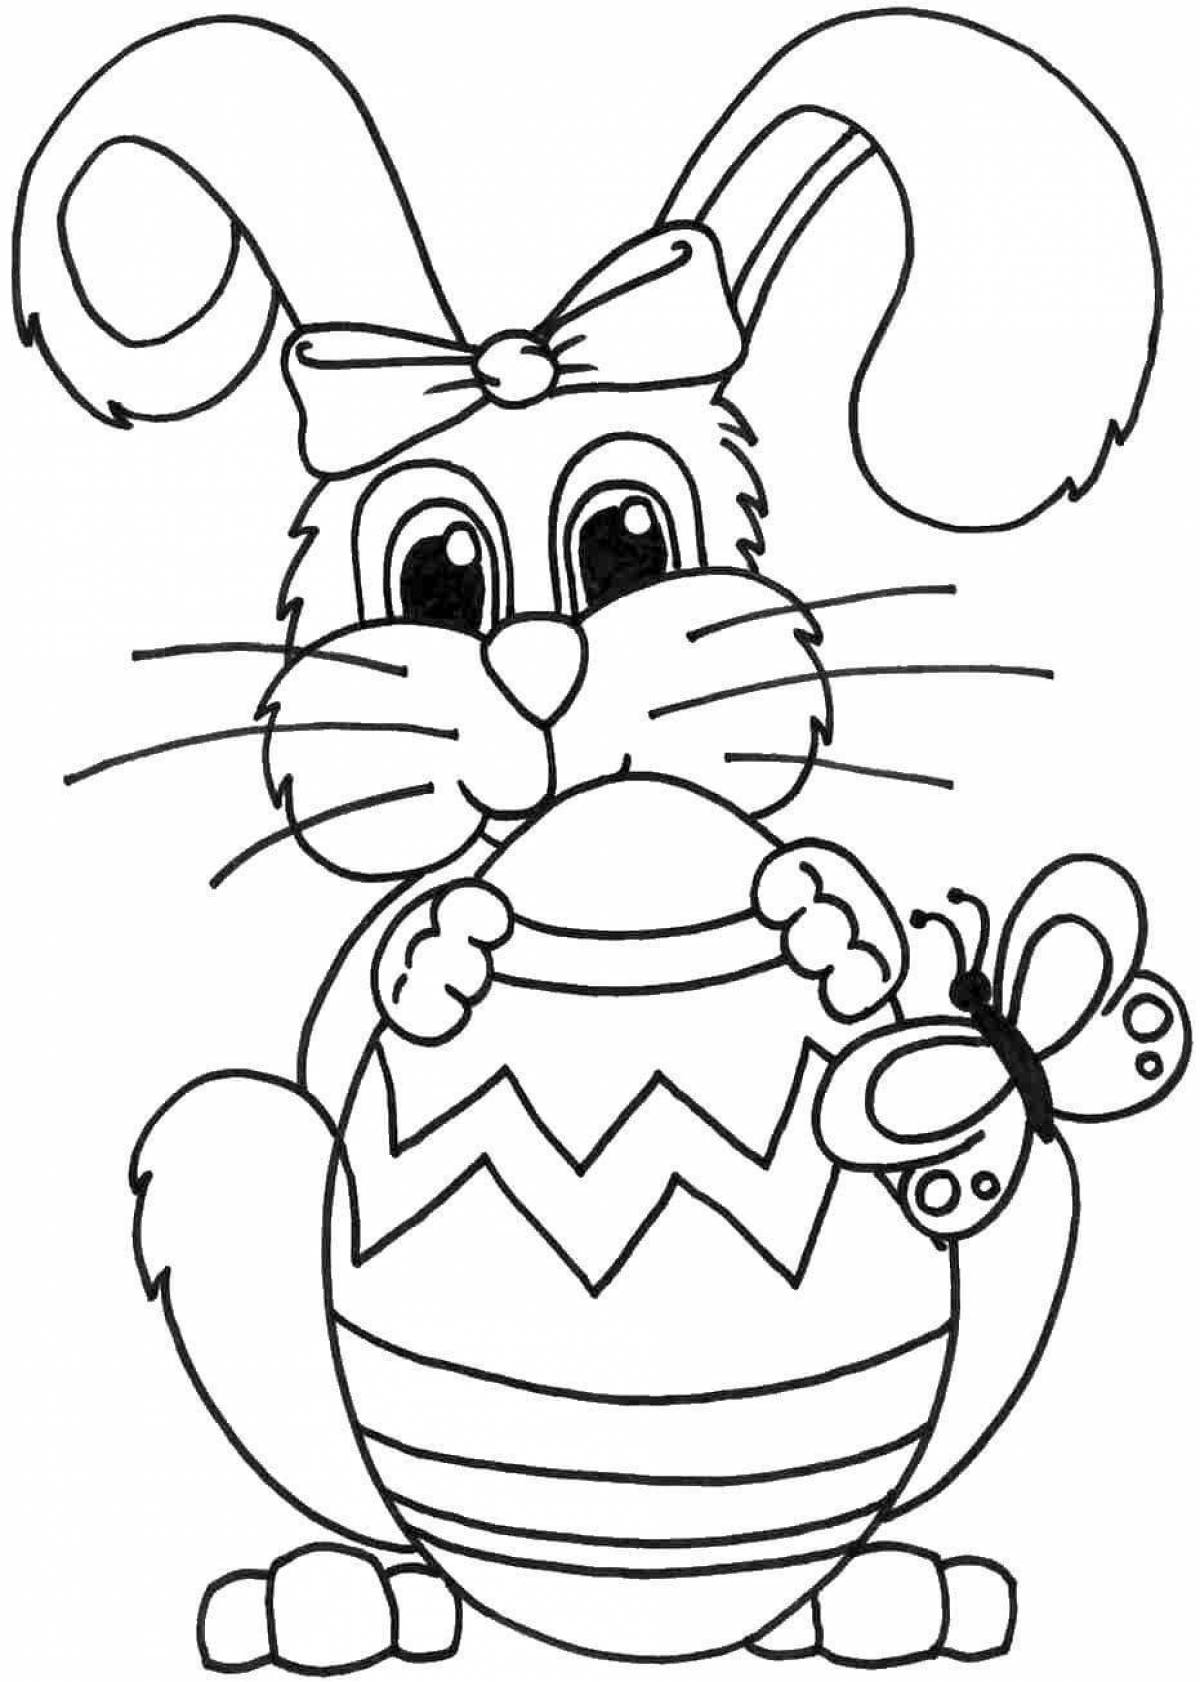 Exciting coloring book christmas bunny